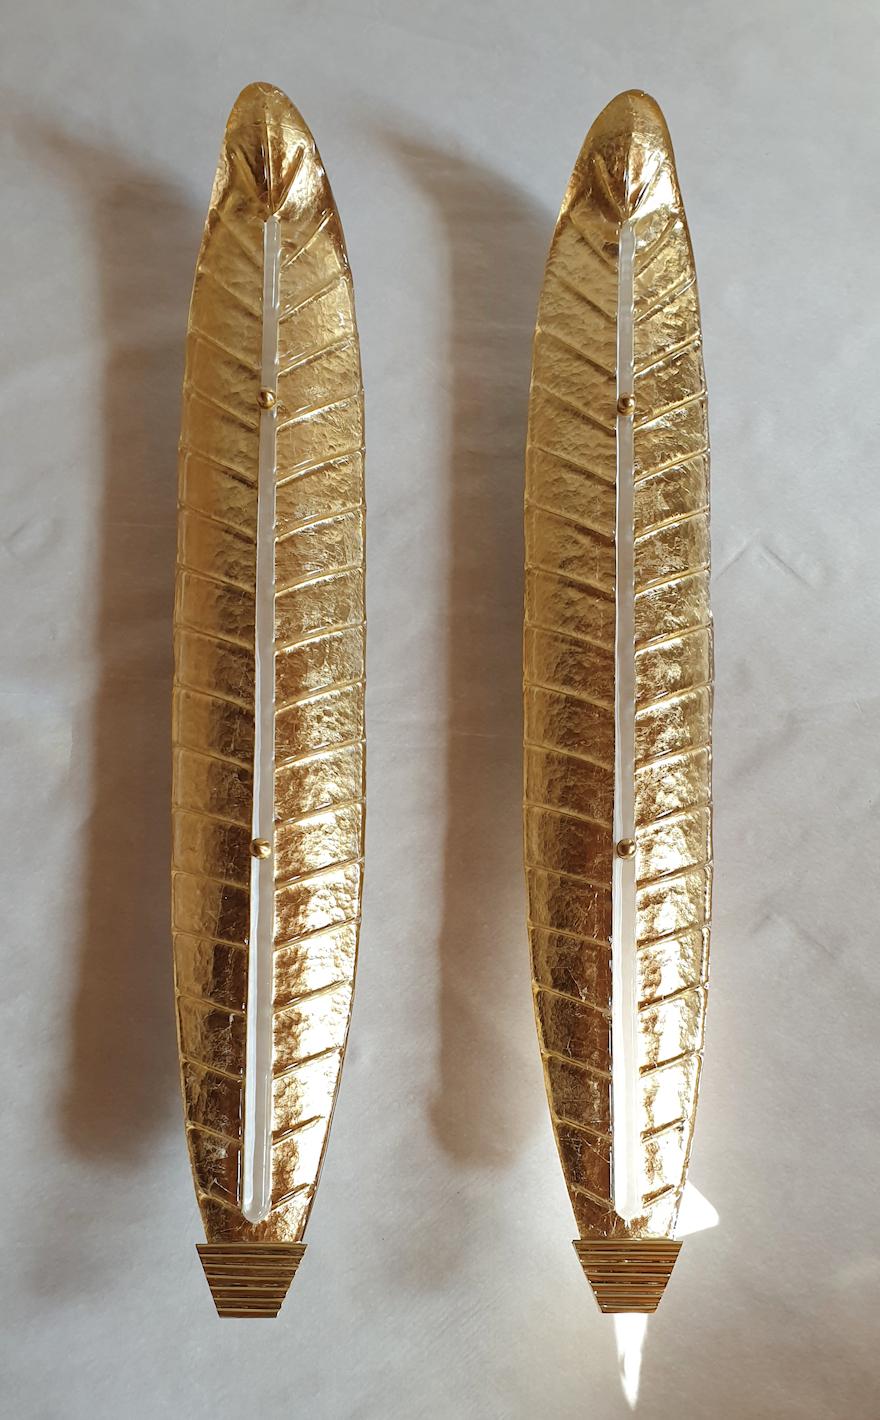 Pair of very tall and thin Mid-Century Modern Murano glass sconces, Barovier & Toso style, Italy 1970s.
Made of brass mounts with a beautiful patina, and gold Murano glass leaves.
The gold inside the sconces create a warm translucent light effect,